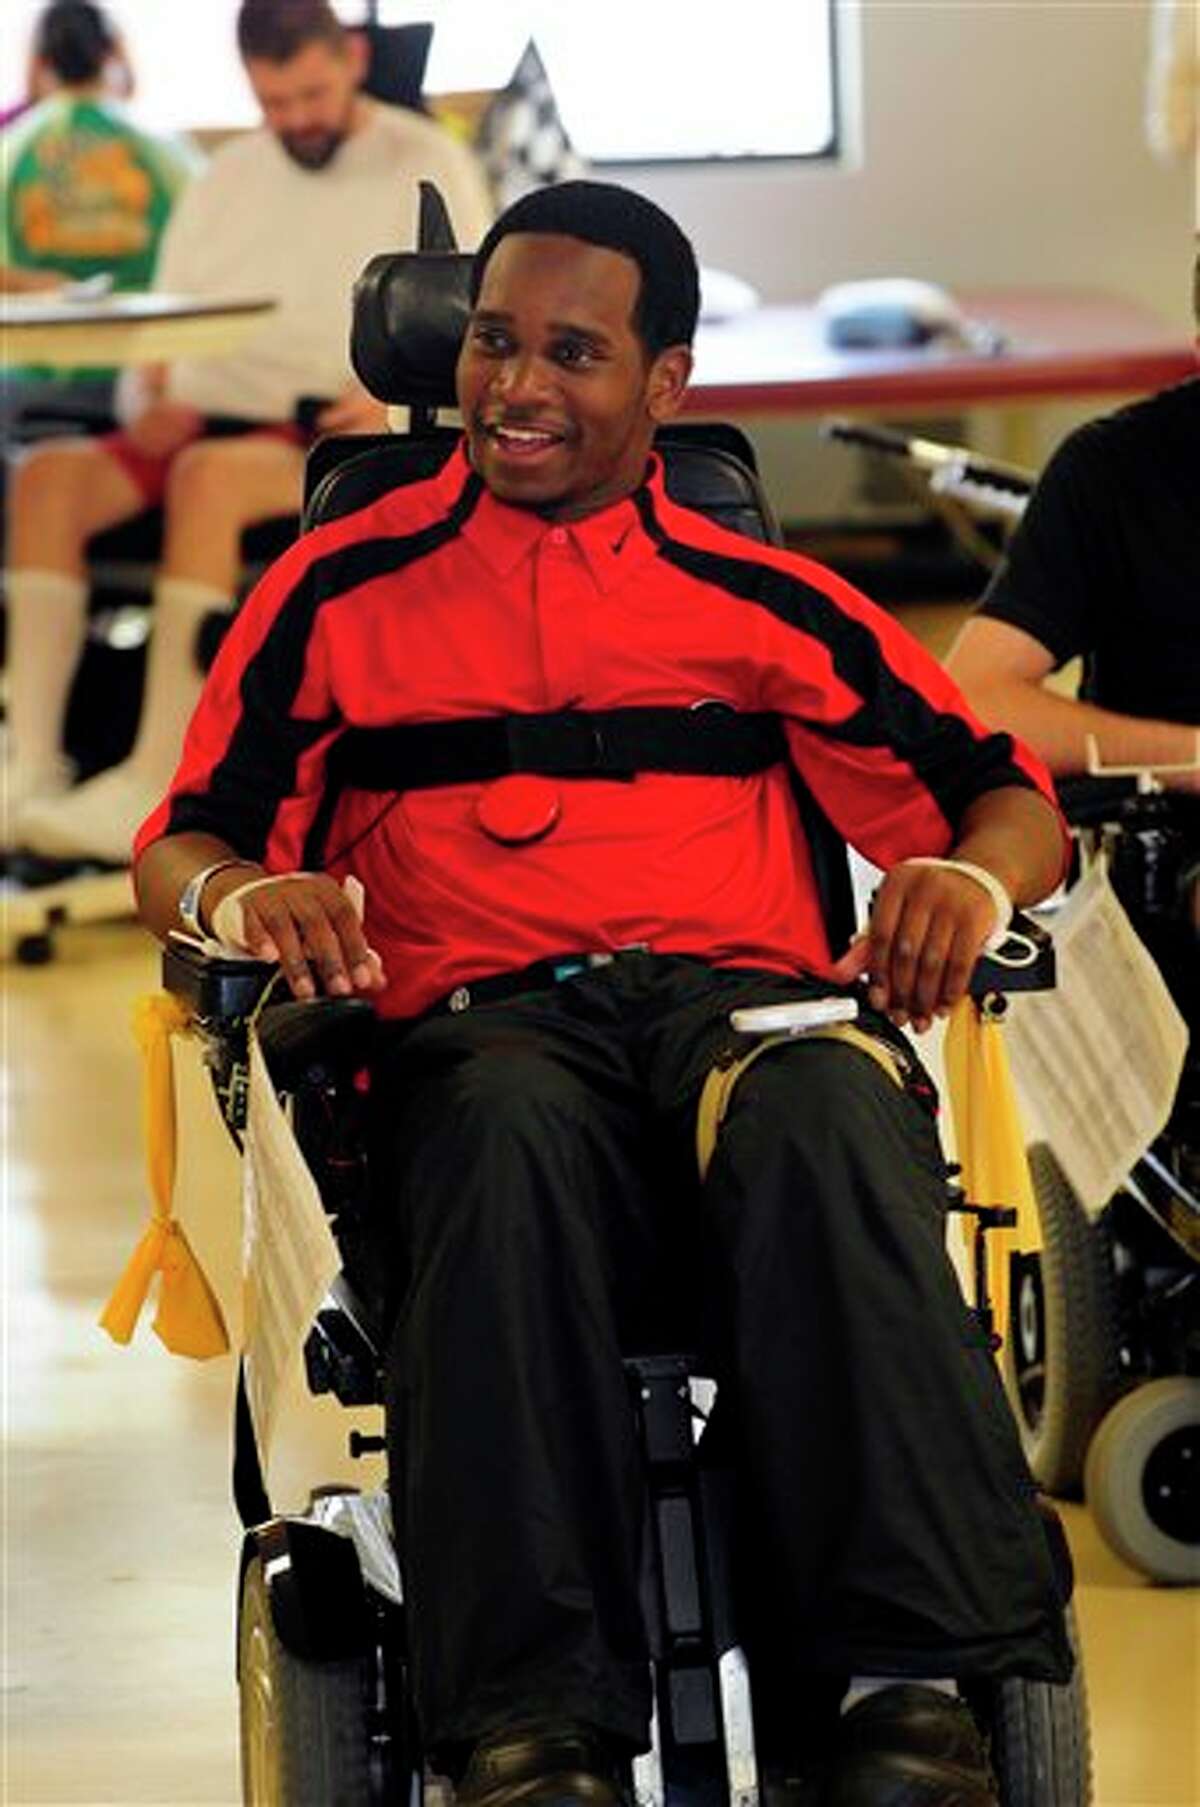 In this May 24, 2011 file photo, Georgia baseball player Johnathan Taylor is released from the Shepherd Center in Atlanta. Taylor was drafted by the Texas Rangers in the 33rd round of Major League Baseball's draft on Wednesday June 8, 2011, although he suffered a career-ending neck injury in a March 6, 2011 baseball game against Florida State when he collided with teammate Zach Cone in the third inning. Cone was also drafted by the Texas Rangers. AP Photo/Athens Banner-Herald, David Tulis